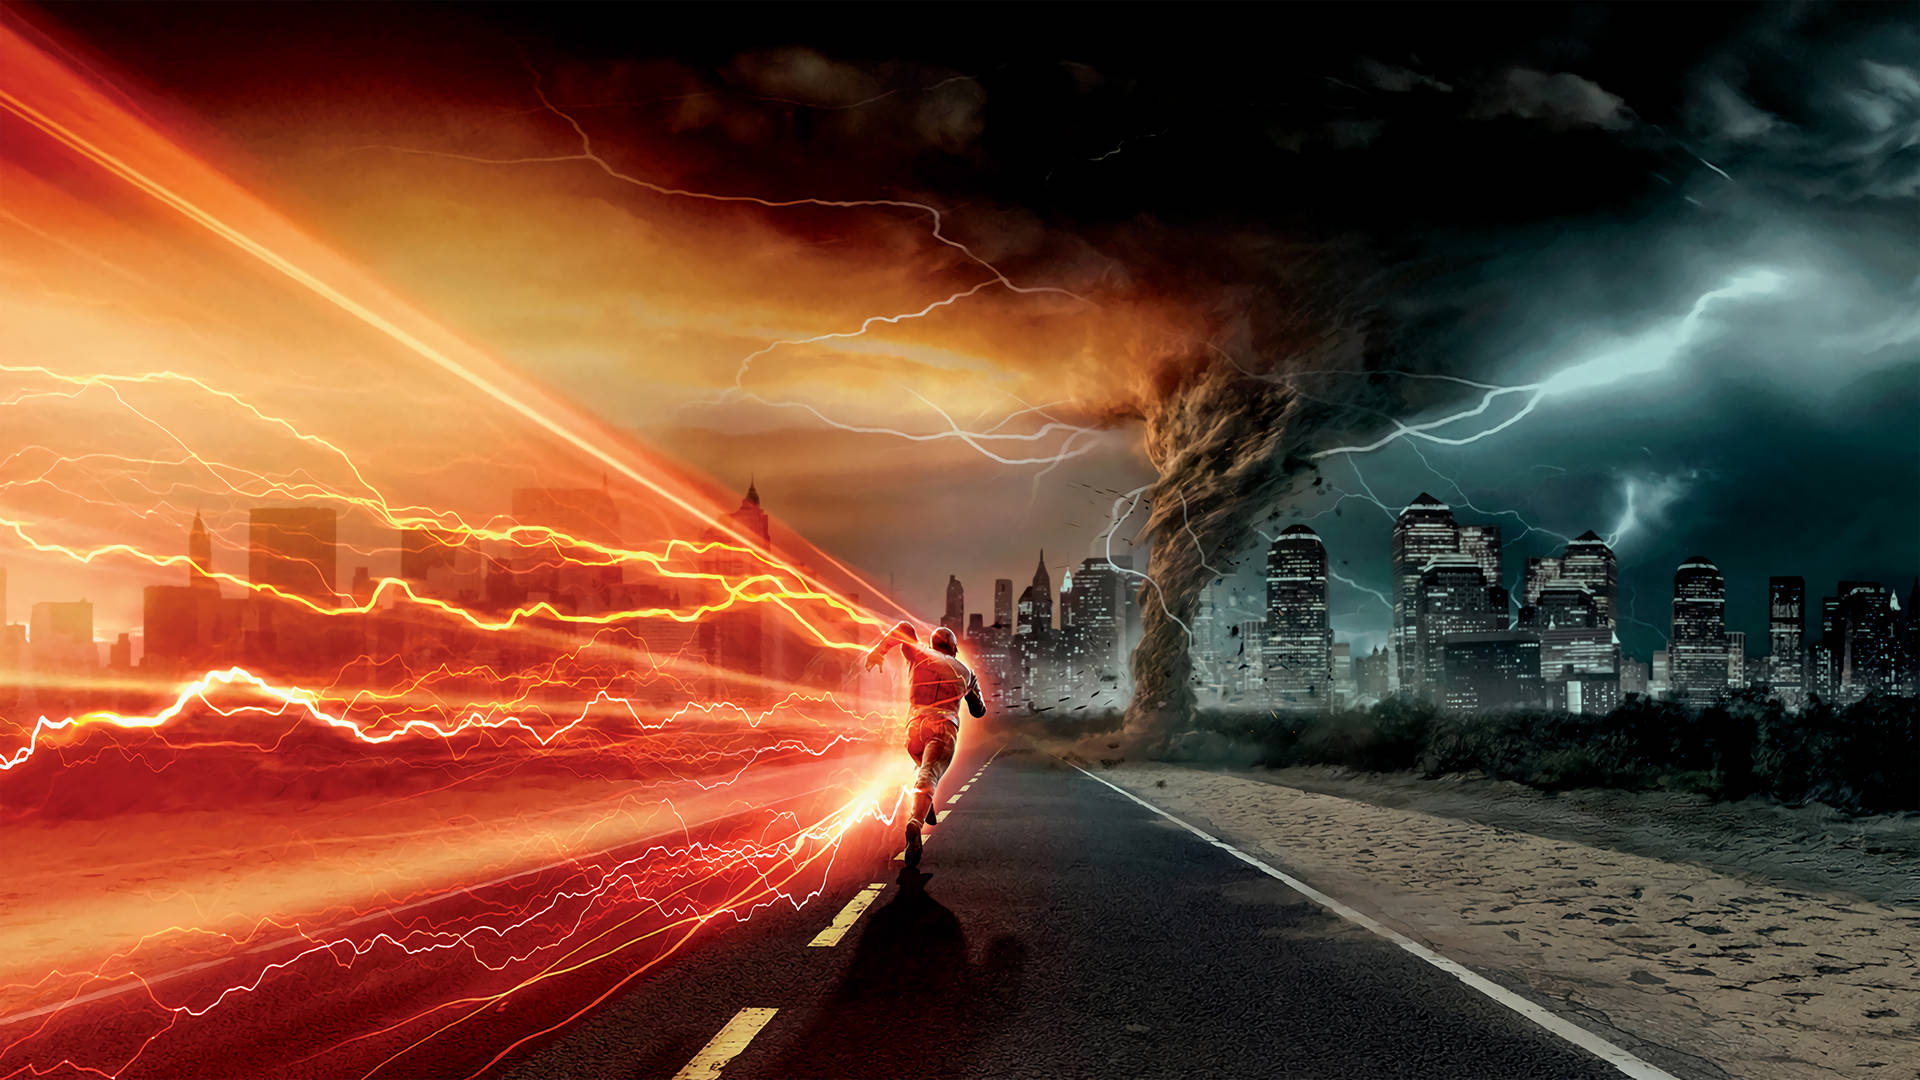 The Flash Running In Road Background